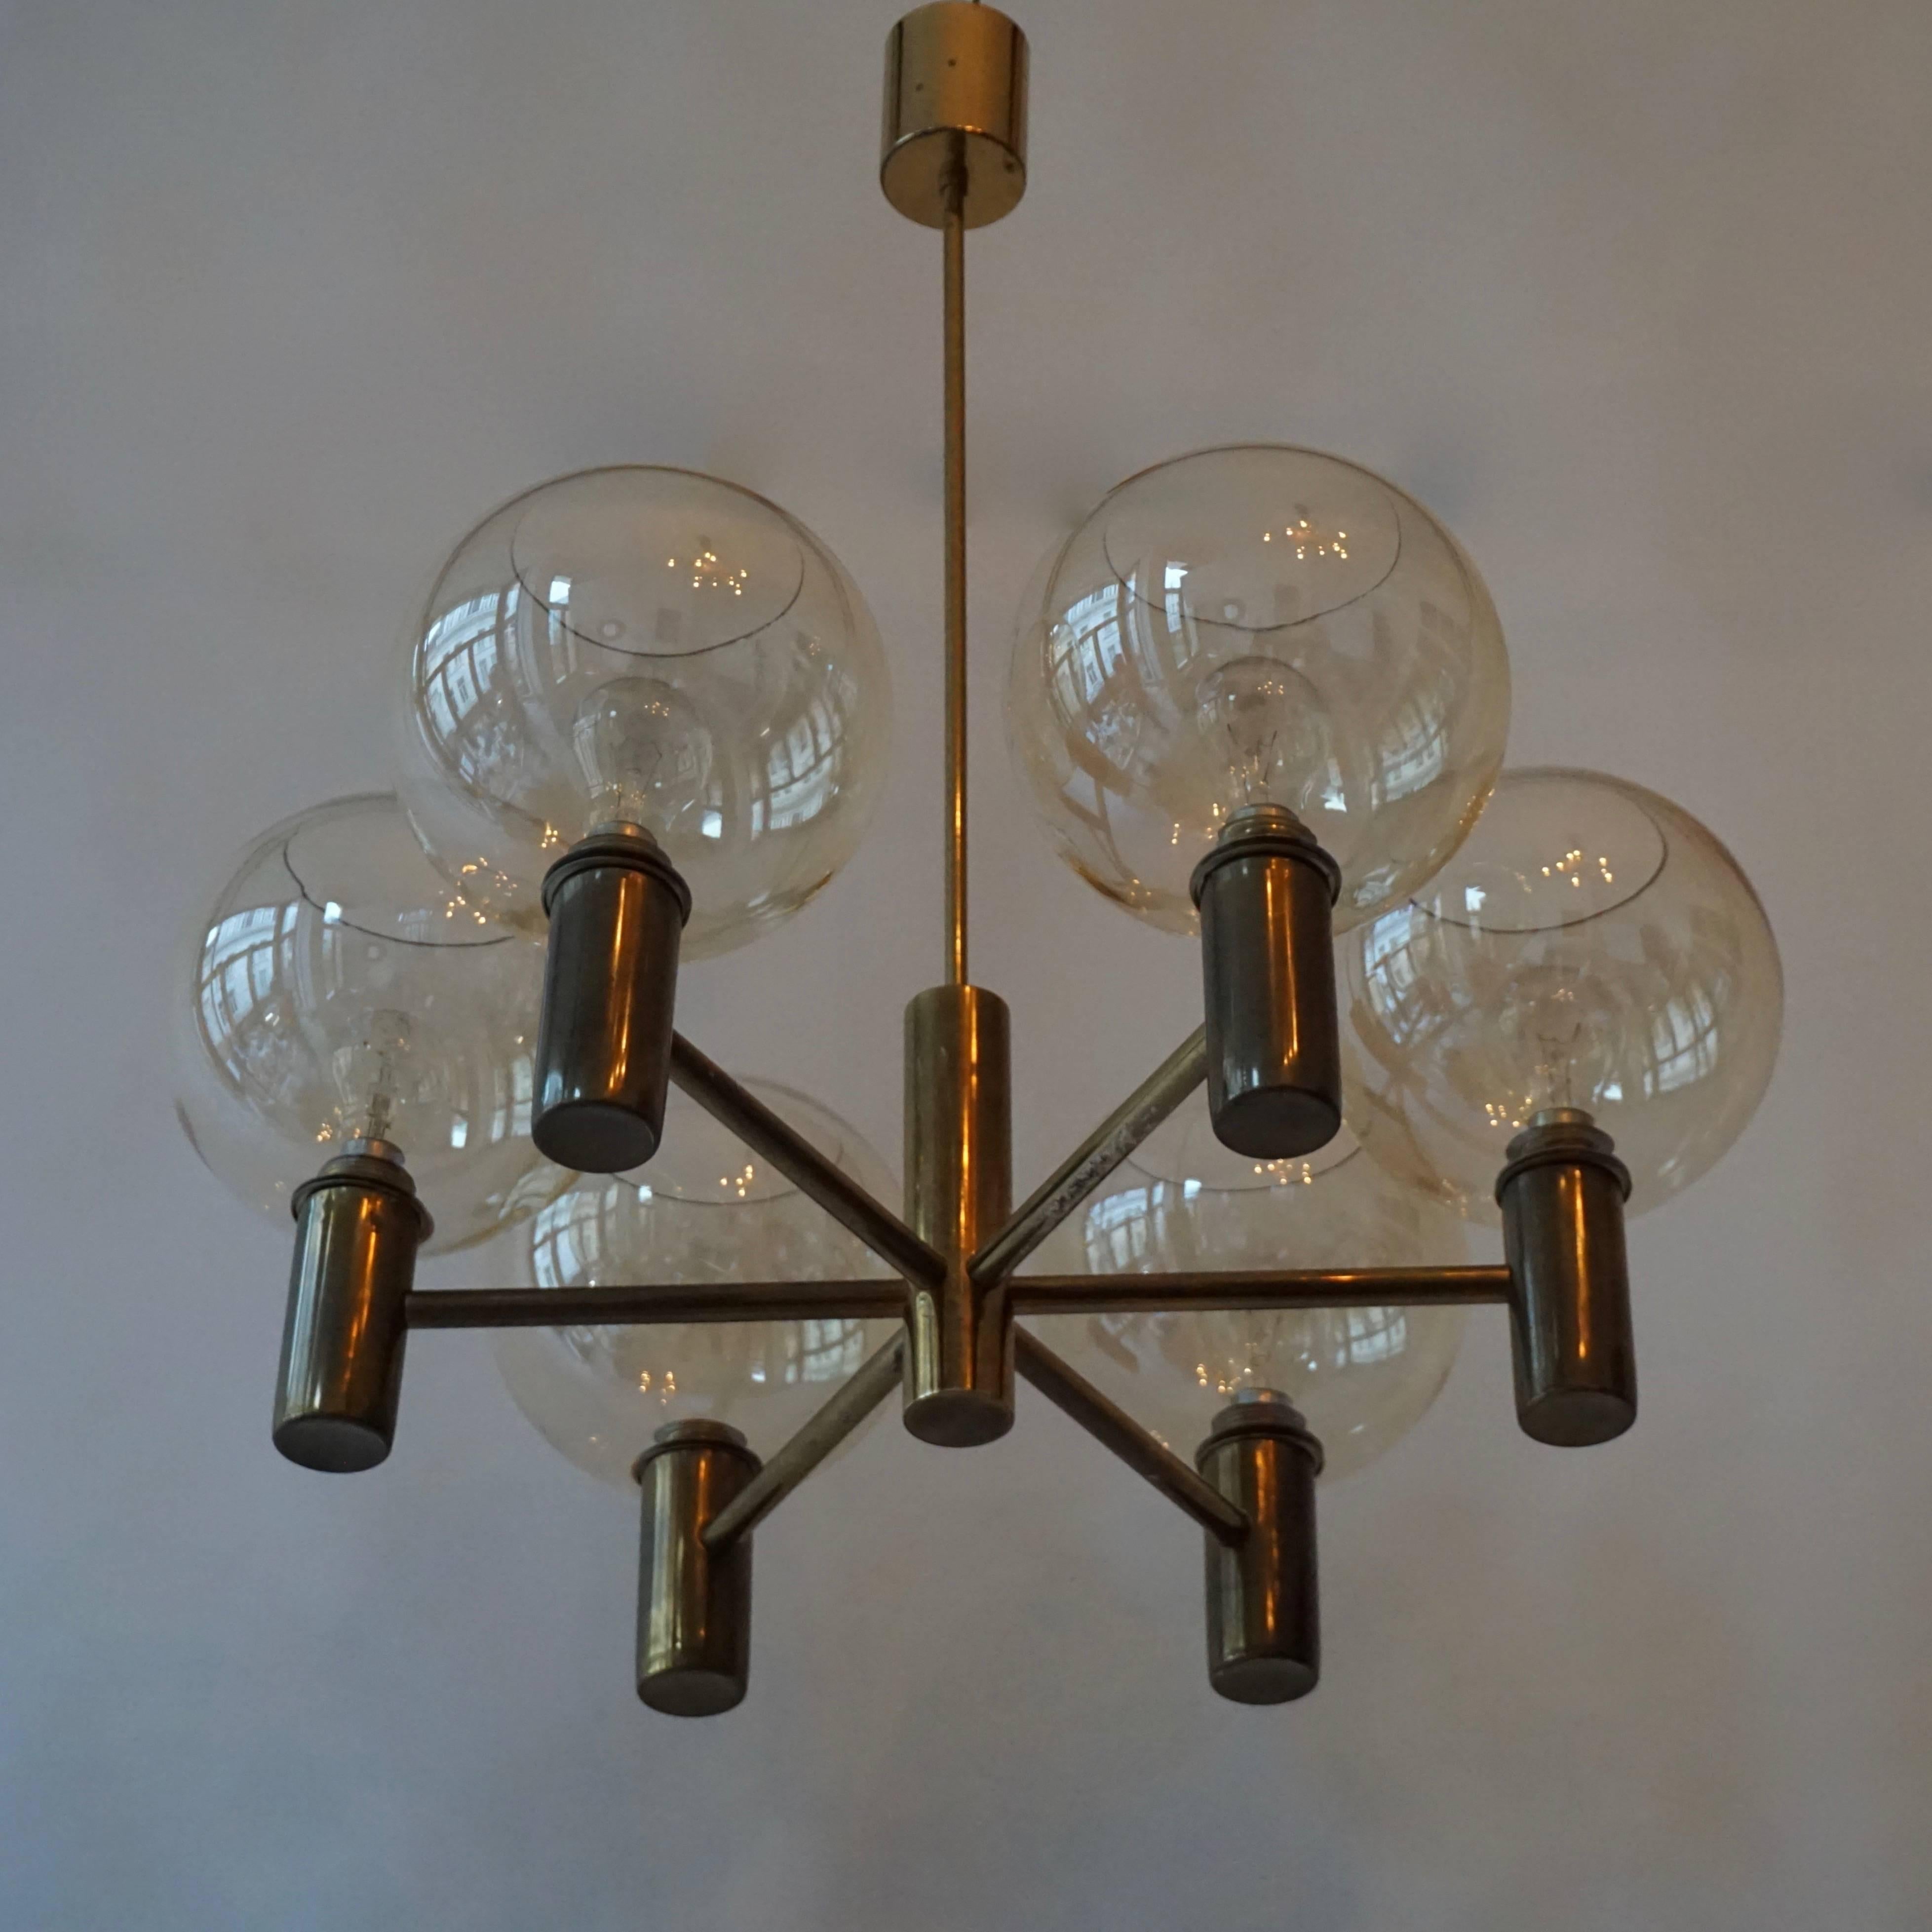 One Hans Agne Jakobsson Chandelier In Good Condition For Sale In Antwerp, BE